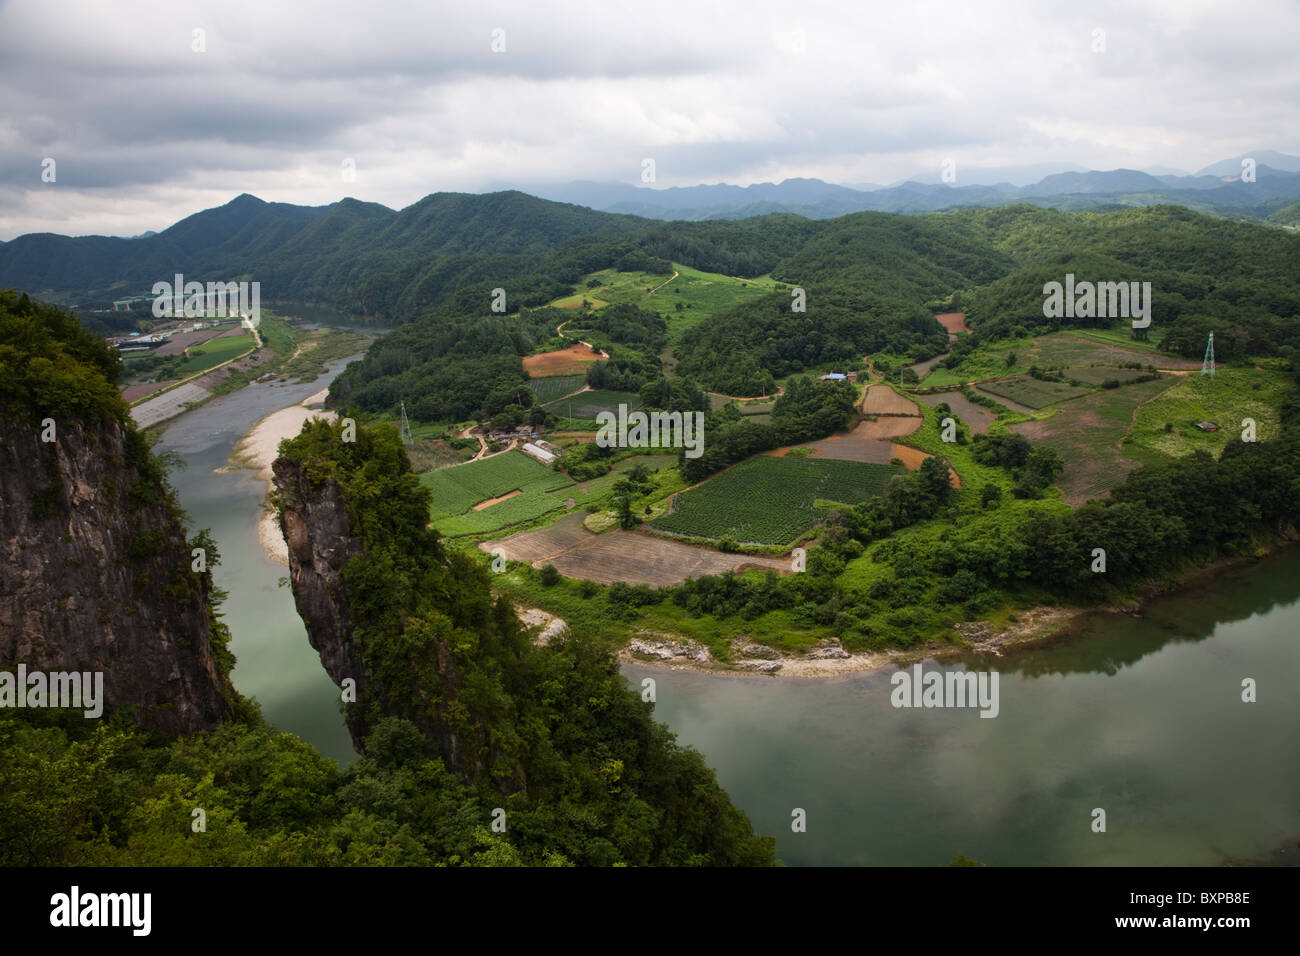 View of Seondol River from a 70m high rock inYeongwol Province, South Korea Stock Photo